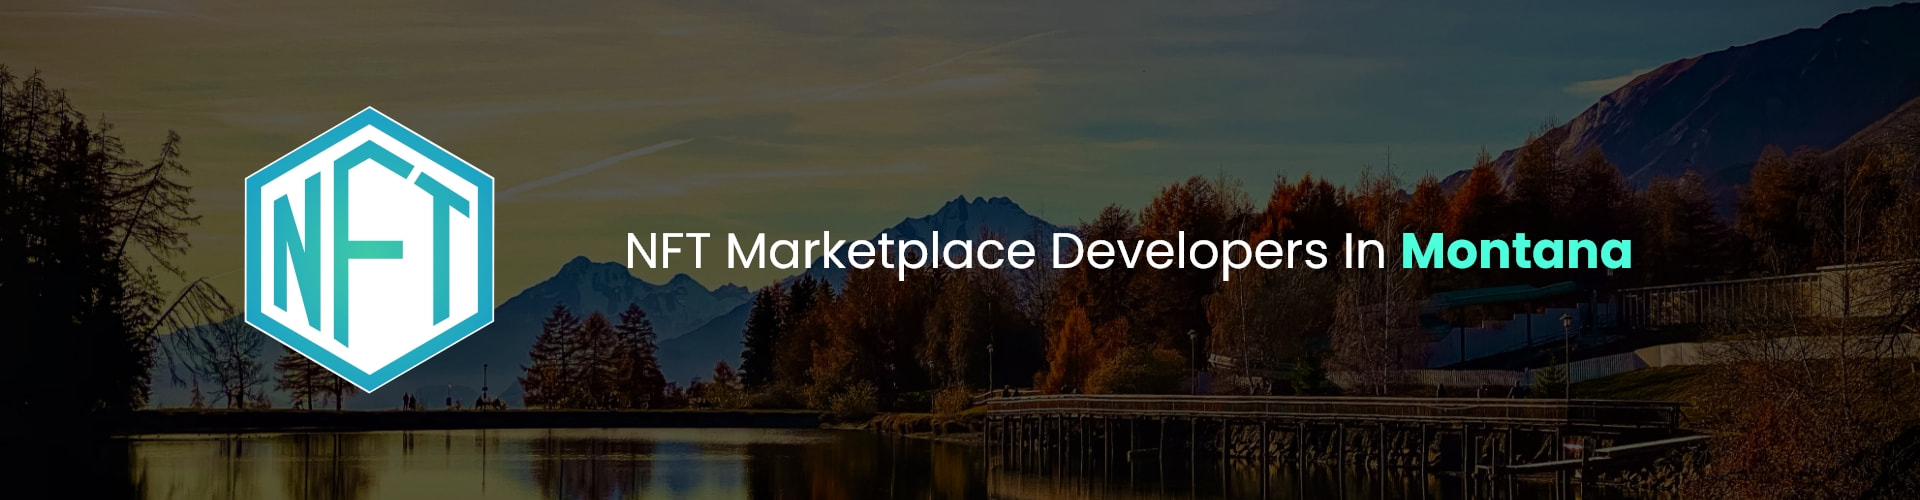 hire nft marketplace developers in montana